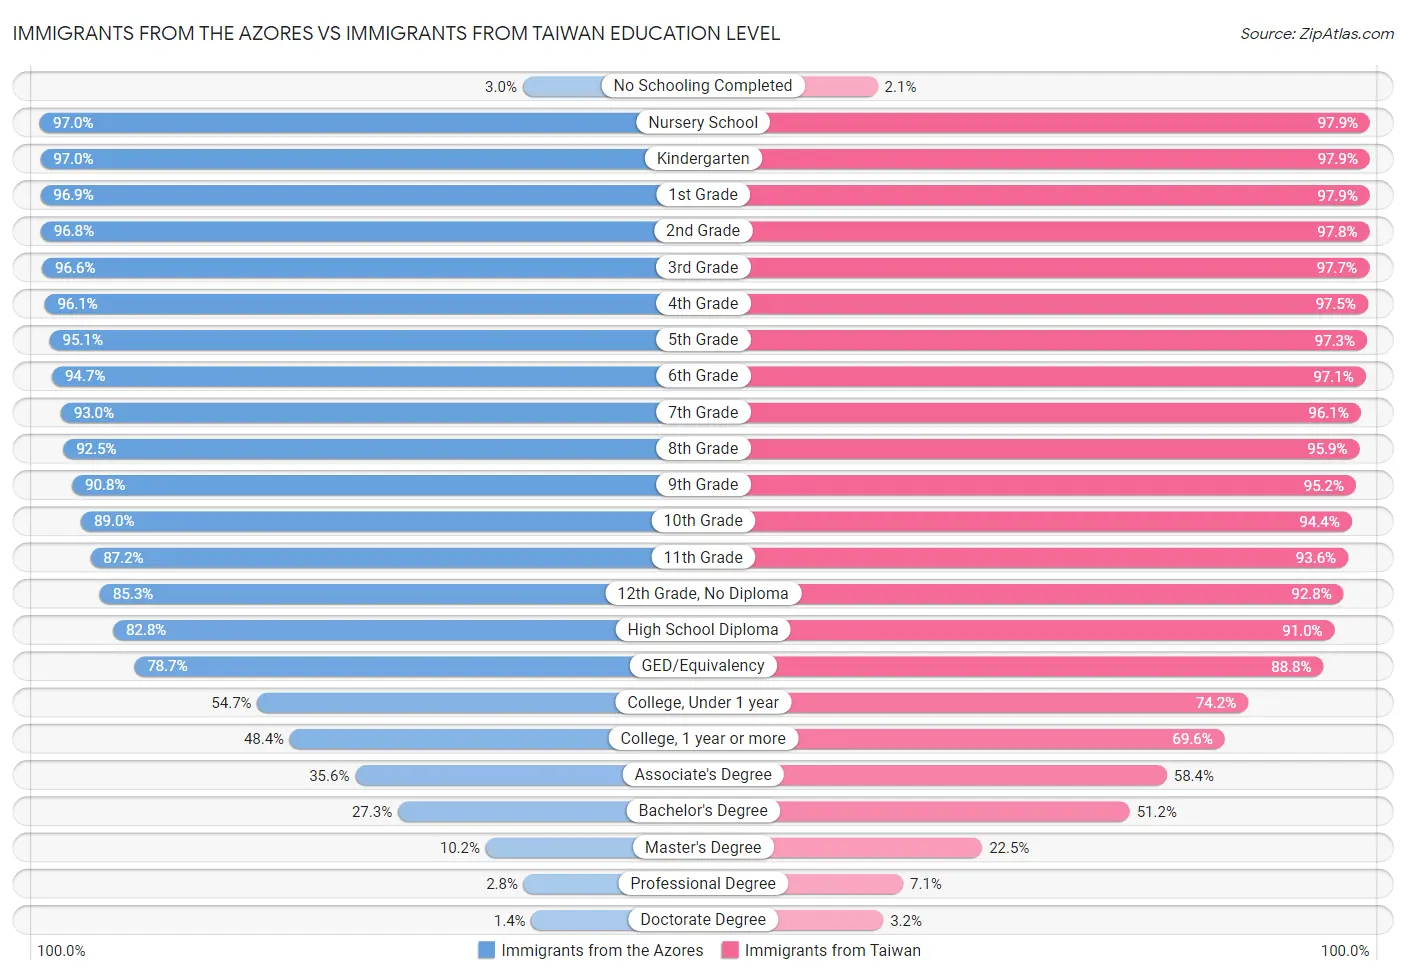 Immigrants from the Azores vs Immigrants from Taiwan Education Level